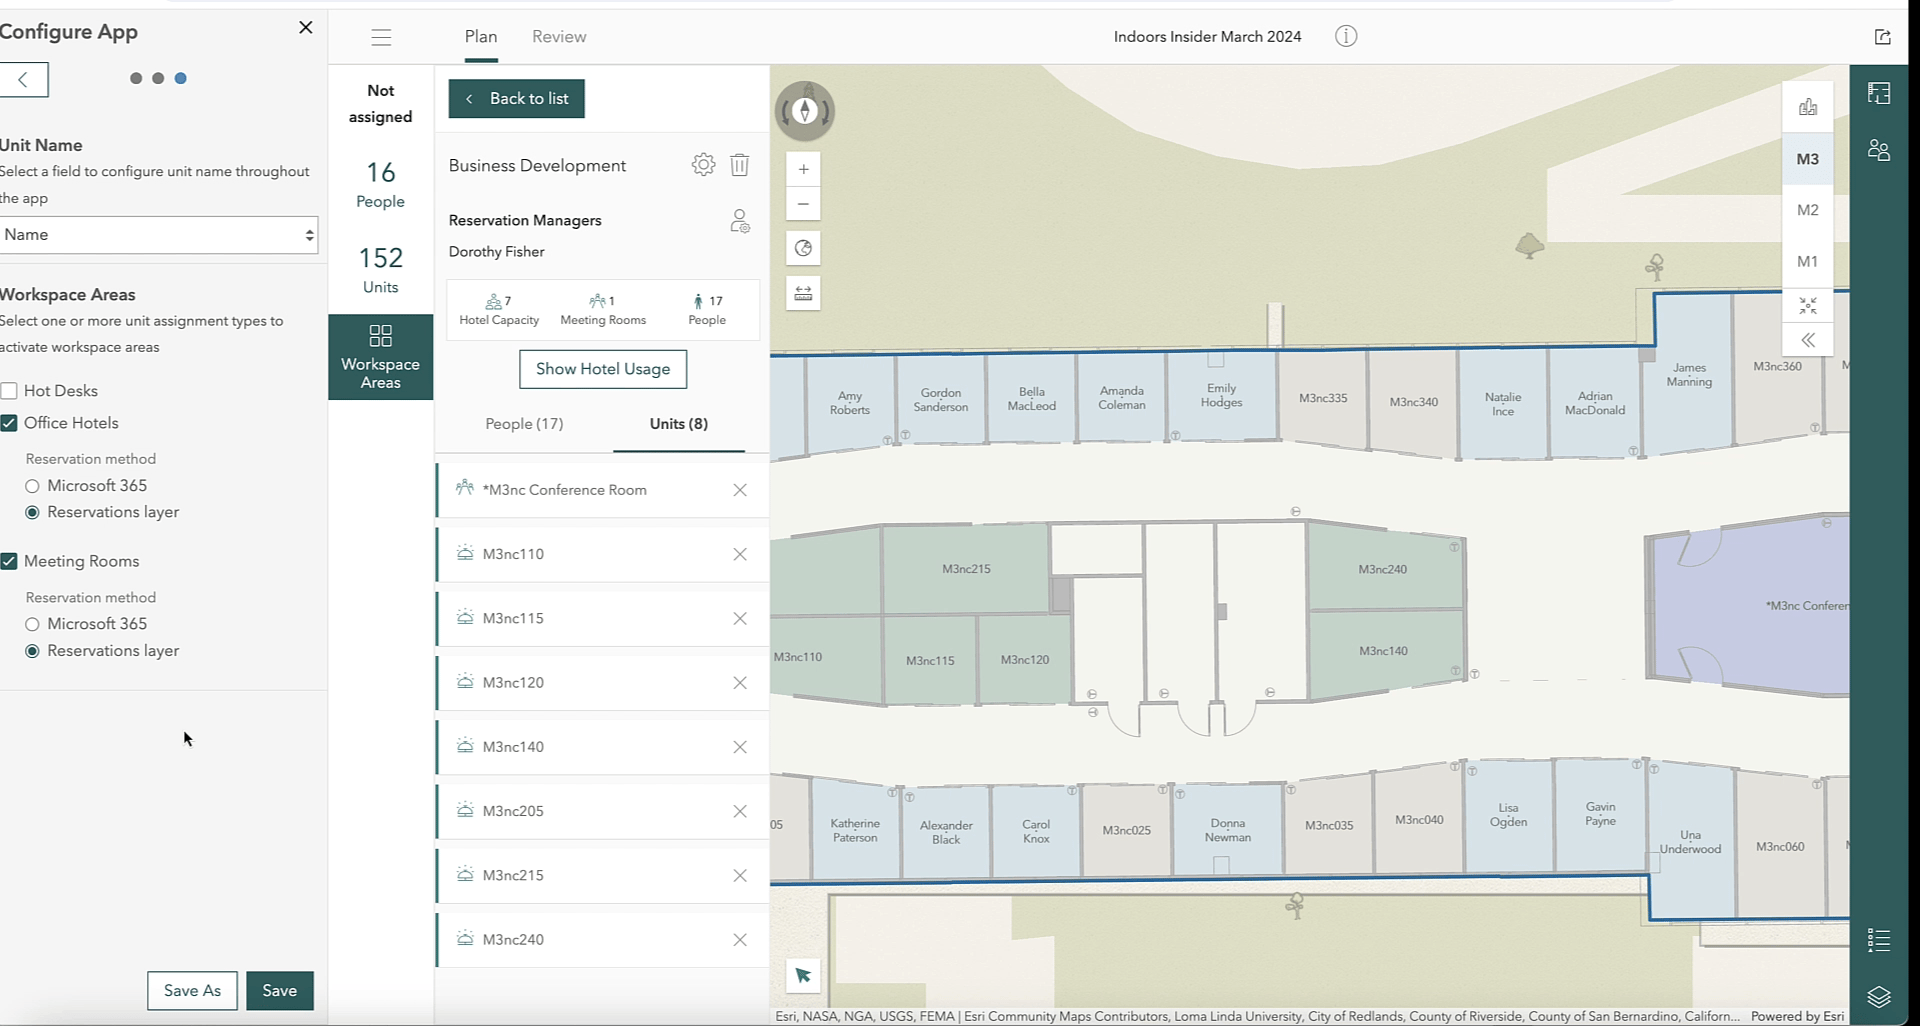 ArcGIS Indoors space planner app - map showing that you can customize workspace area types